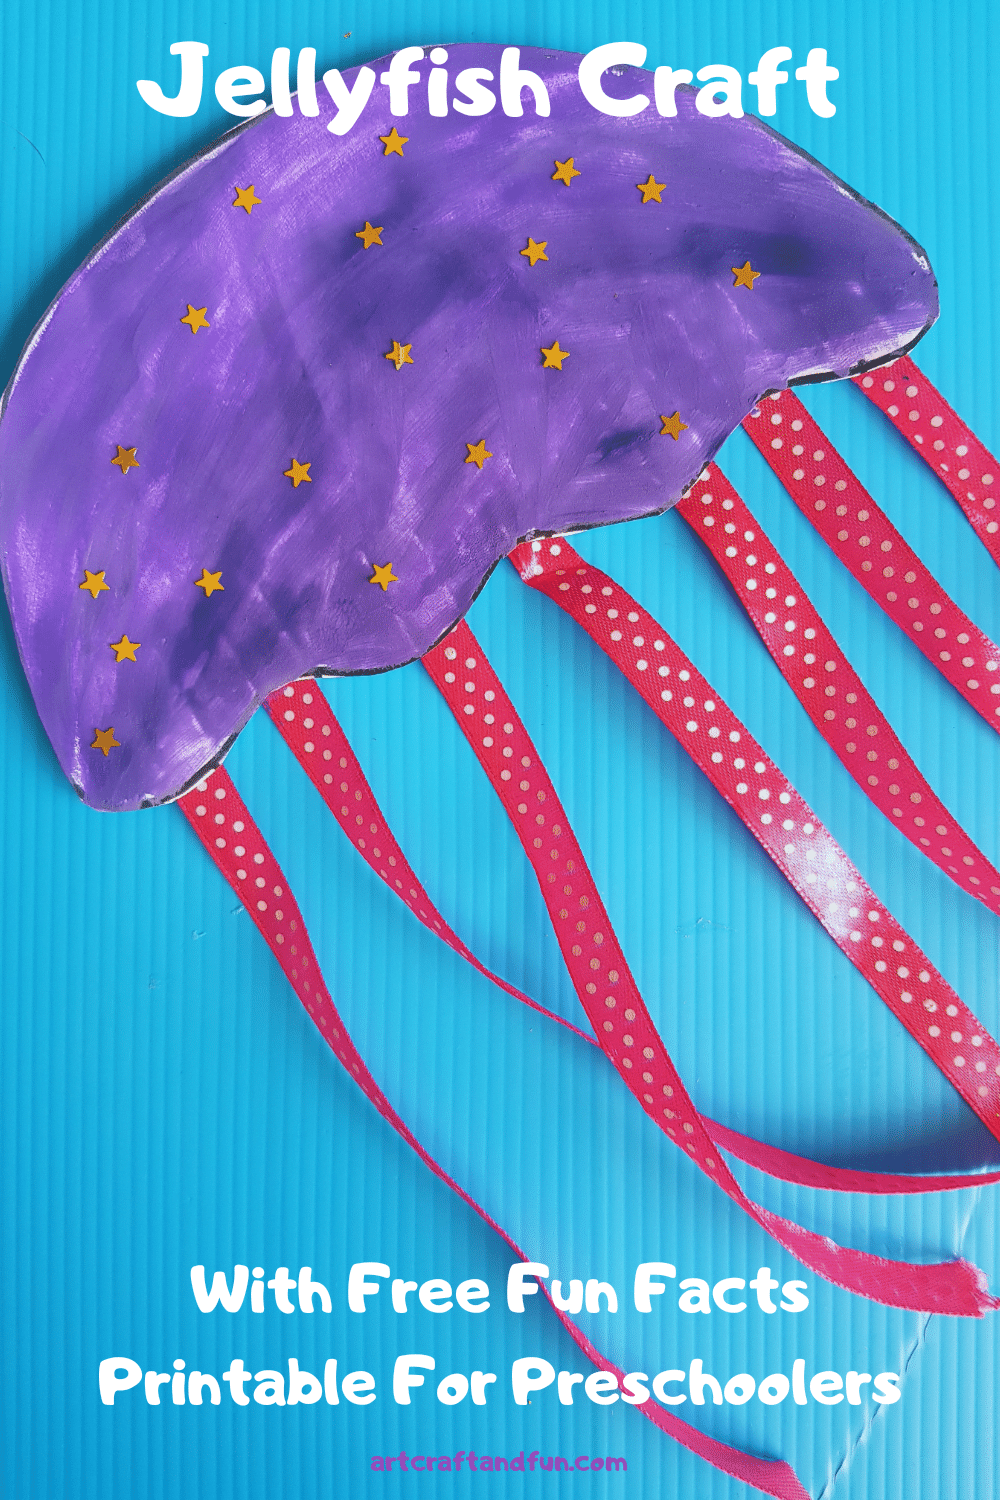 Make this easy Jellyfish Craft today and grab free printable fun facts